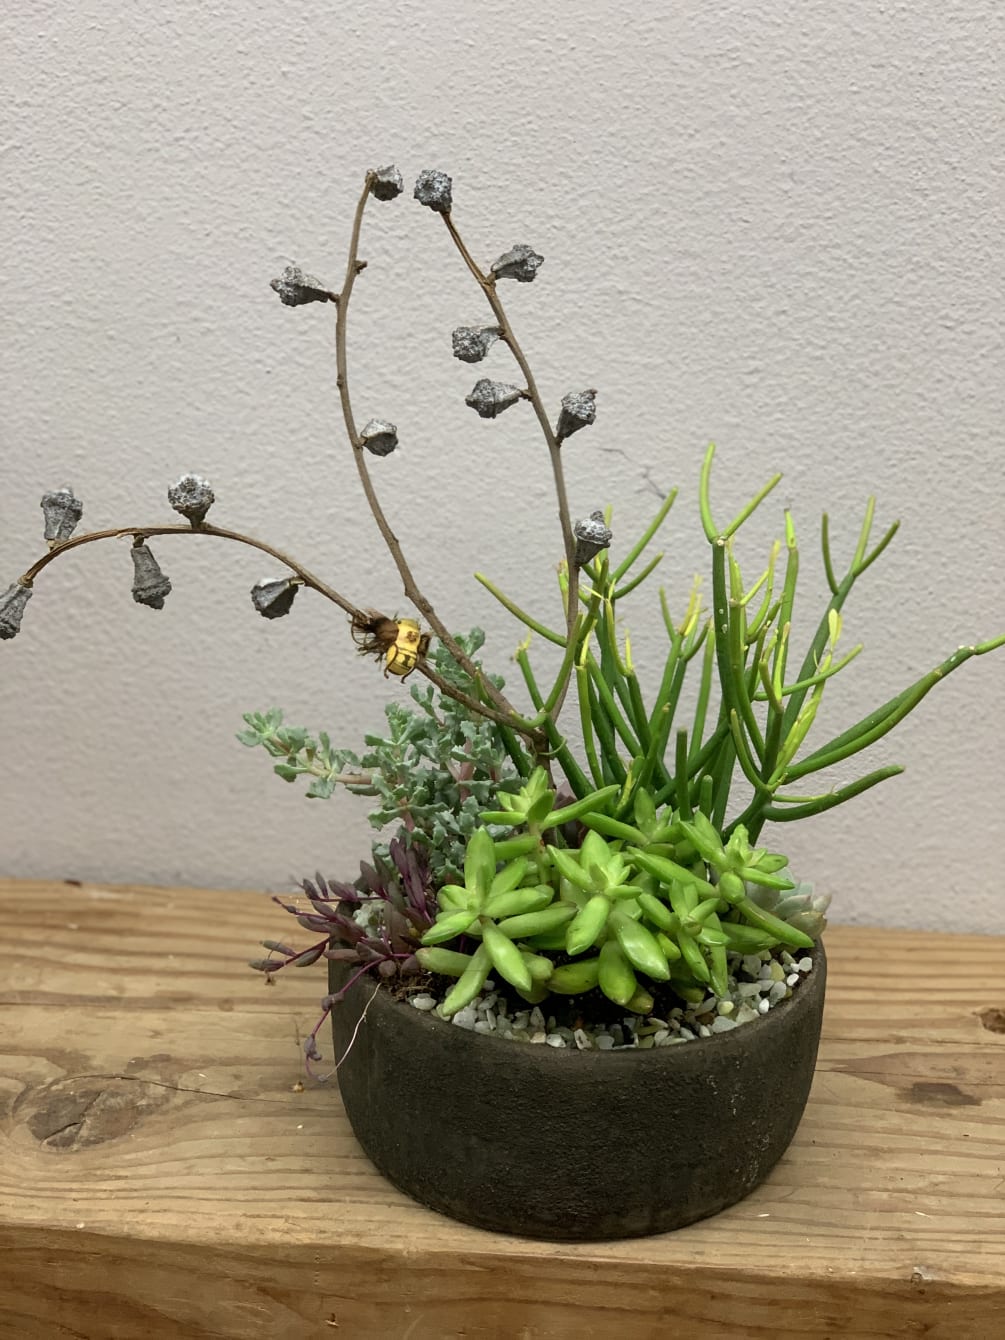 A grey stone pot filled with an abundance of assorted succulents and